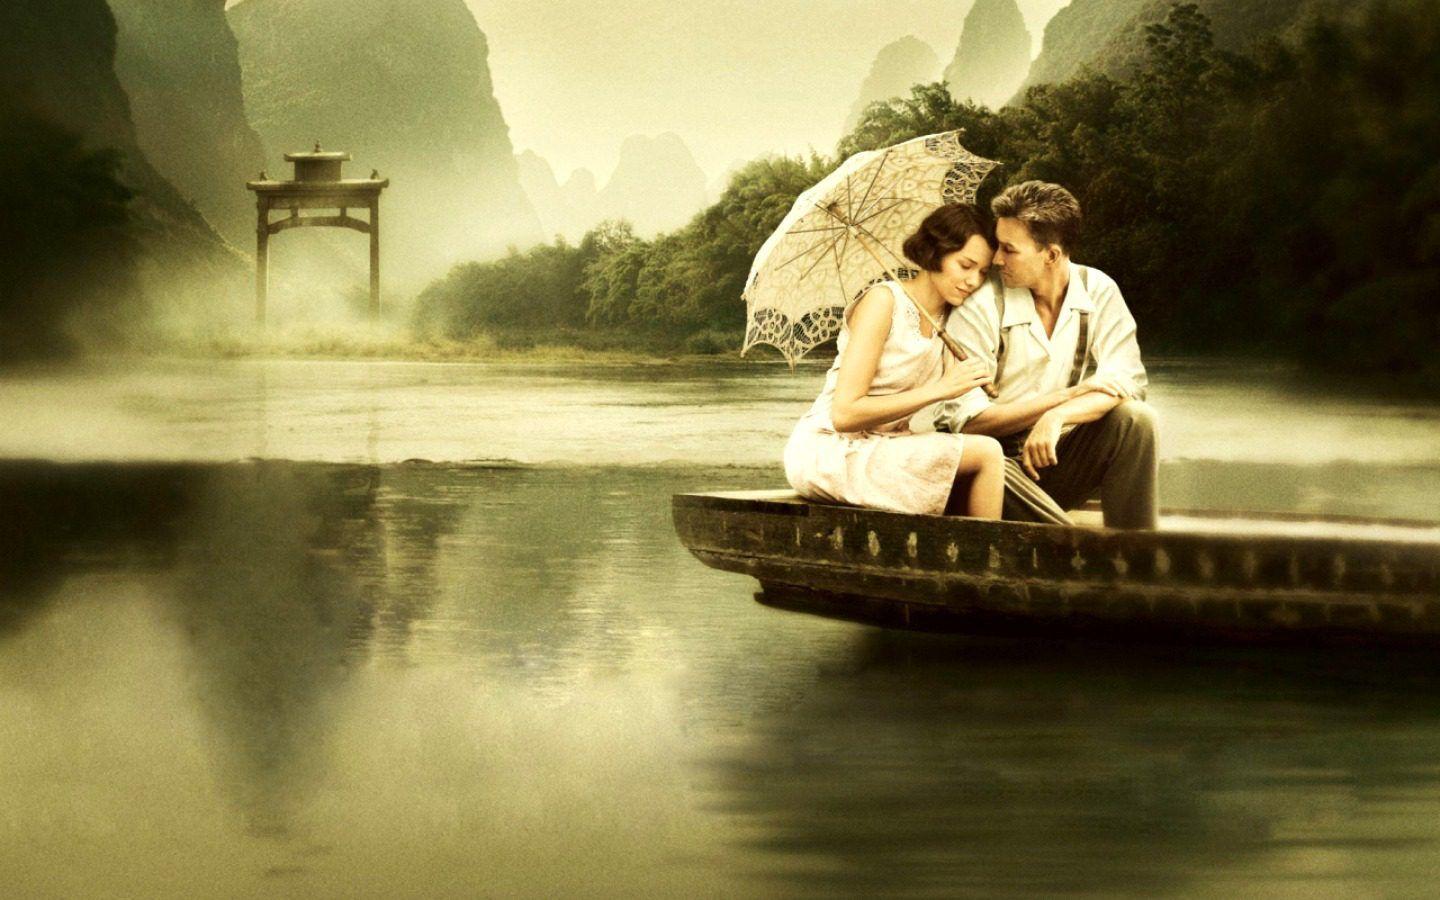 # Best Couples Wallpaper & Couple Picture For Valentine